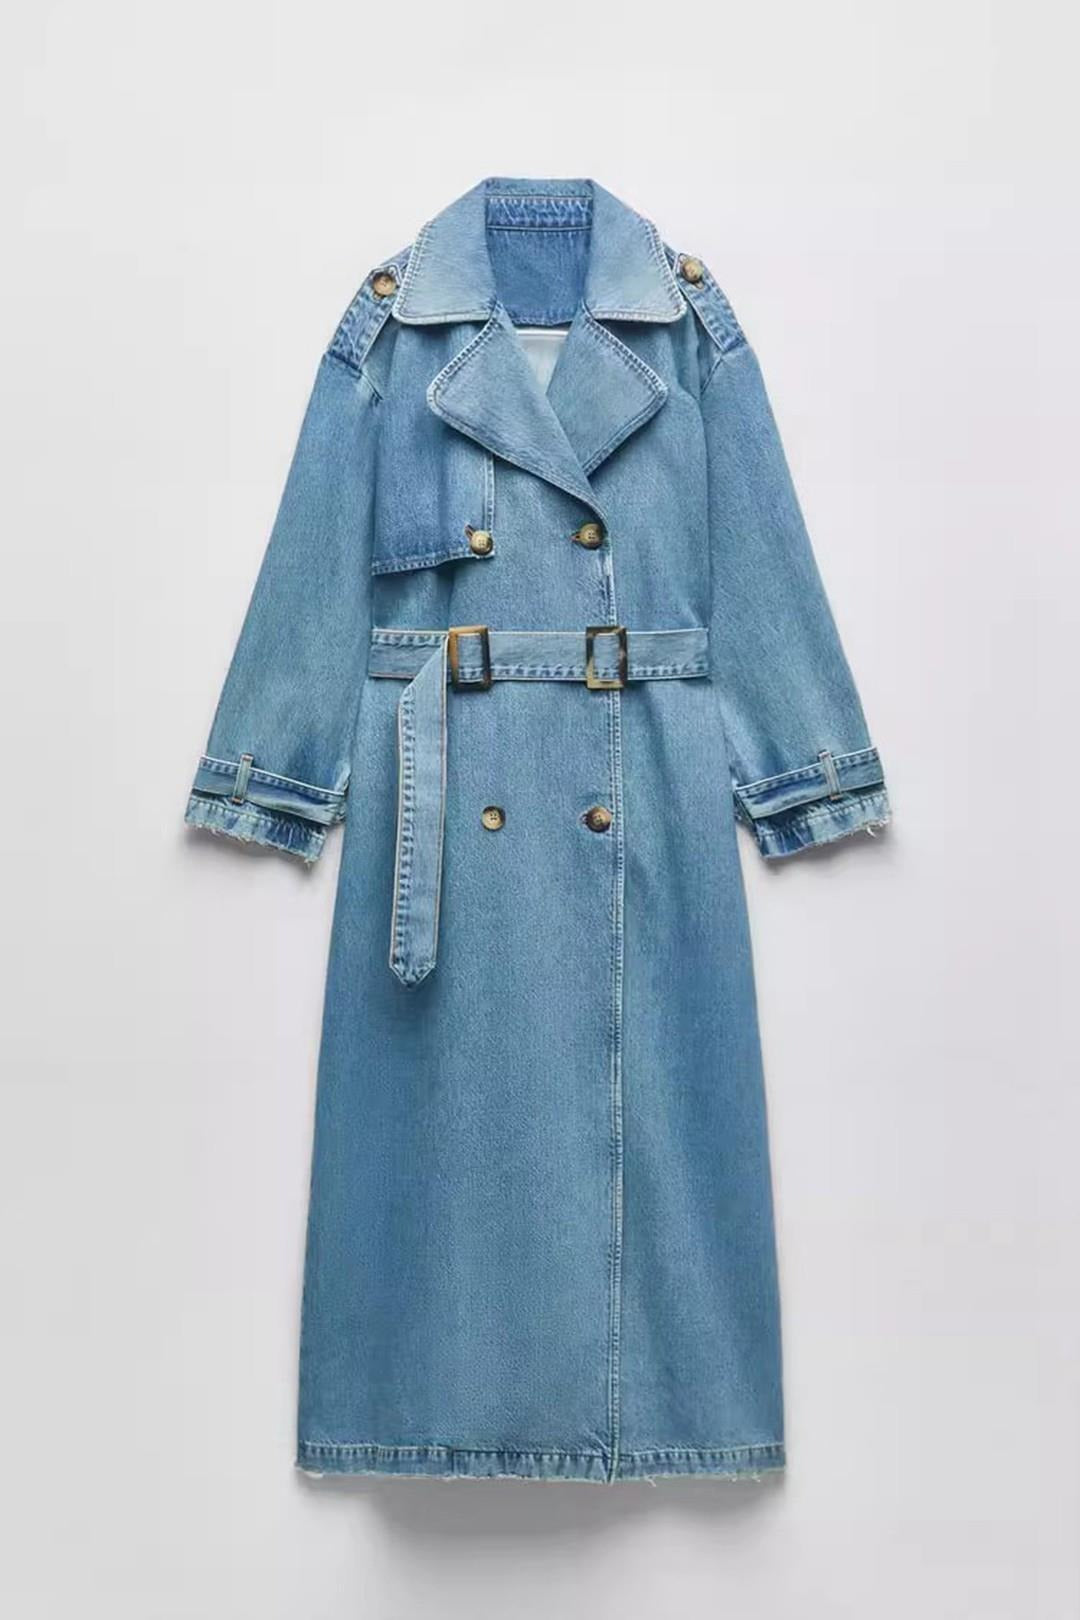 Mid-Length Double-Breasted Denim Trench Coat